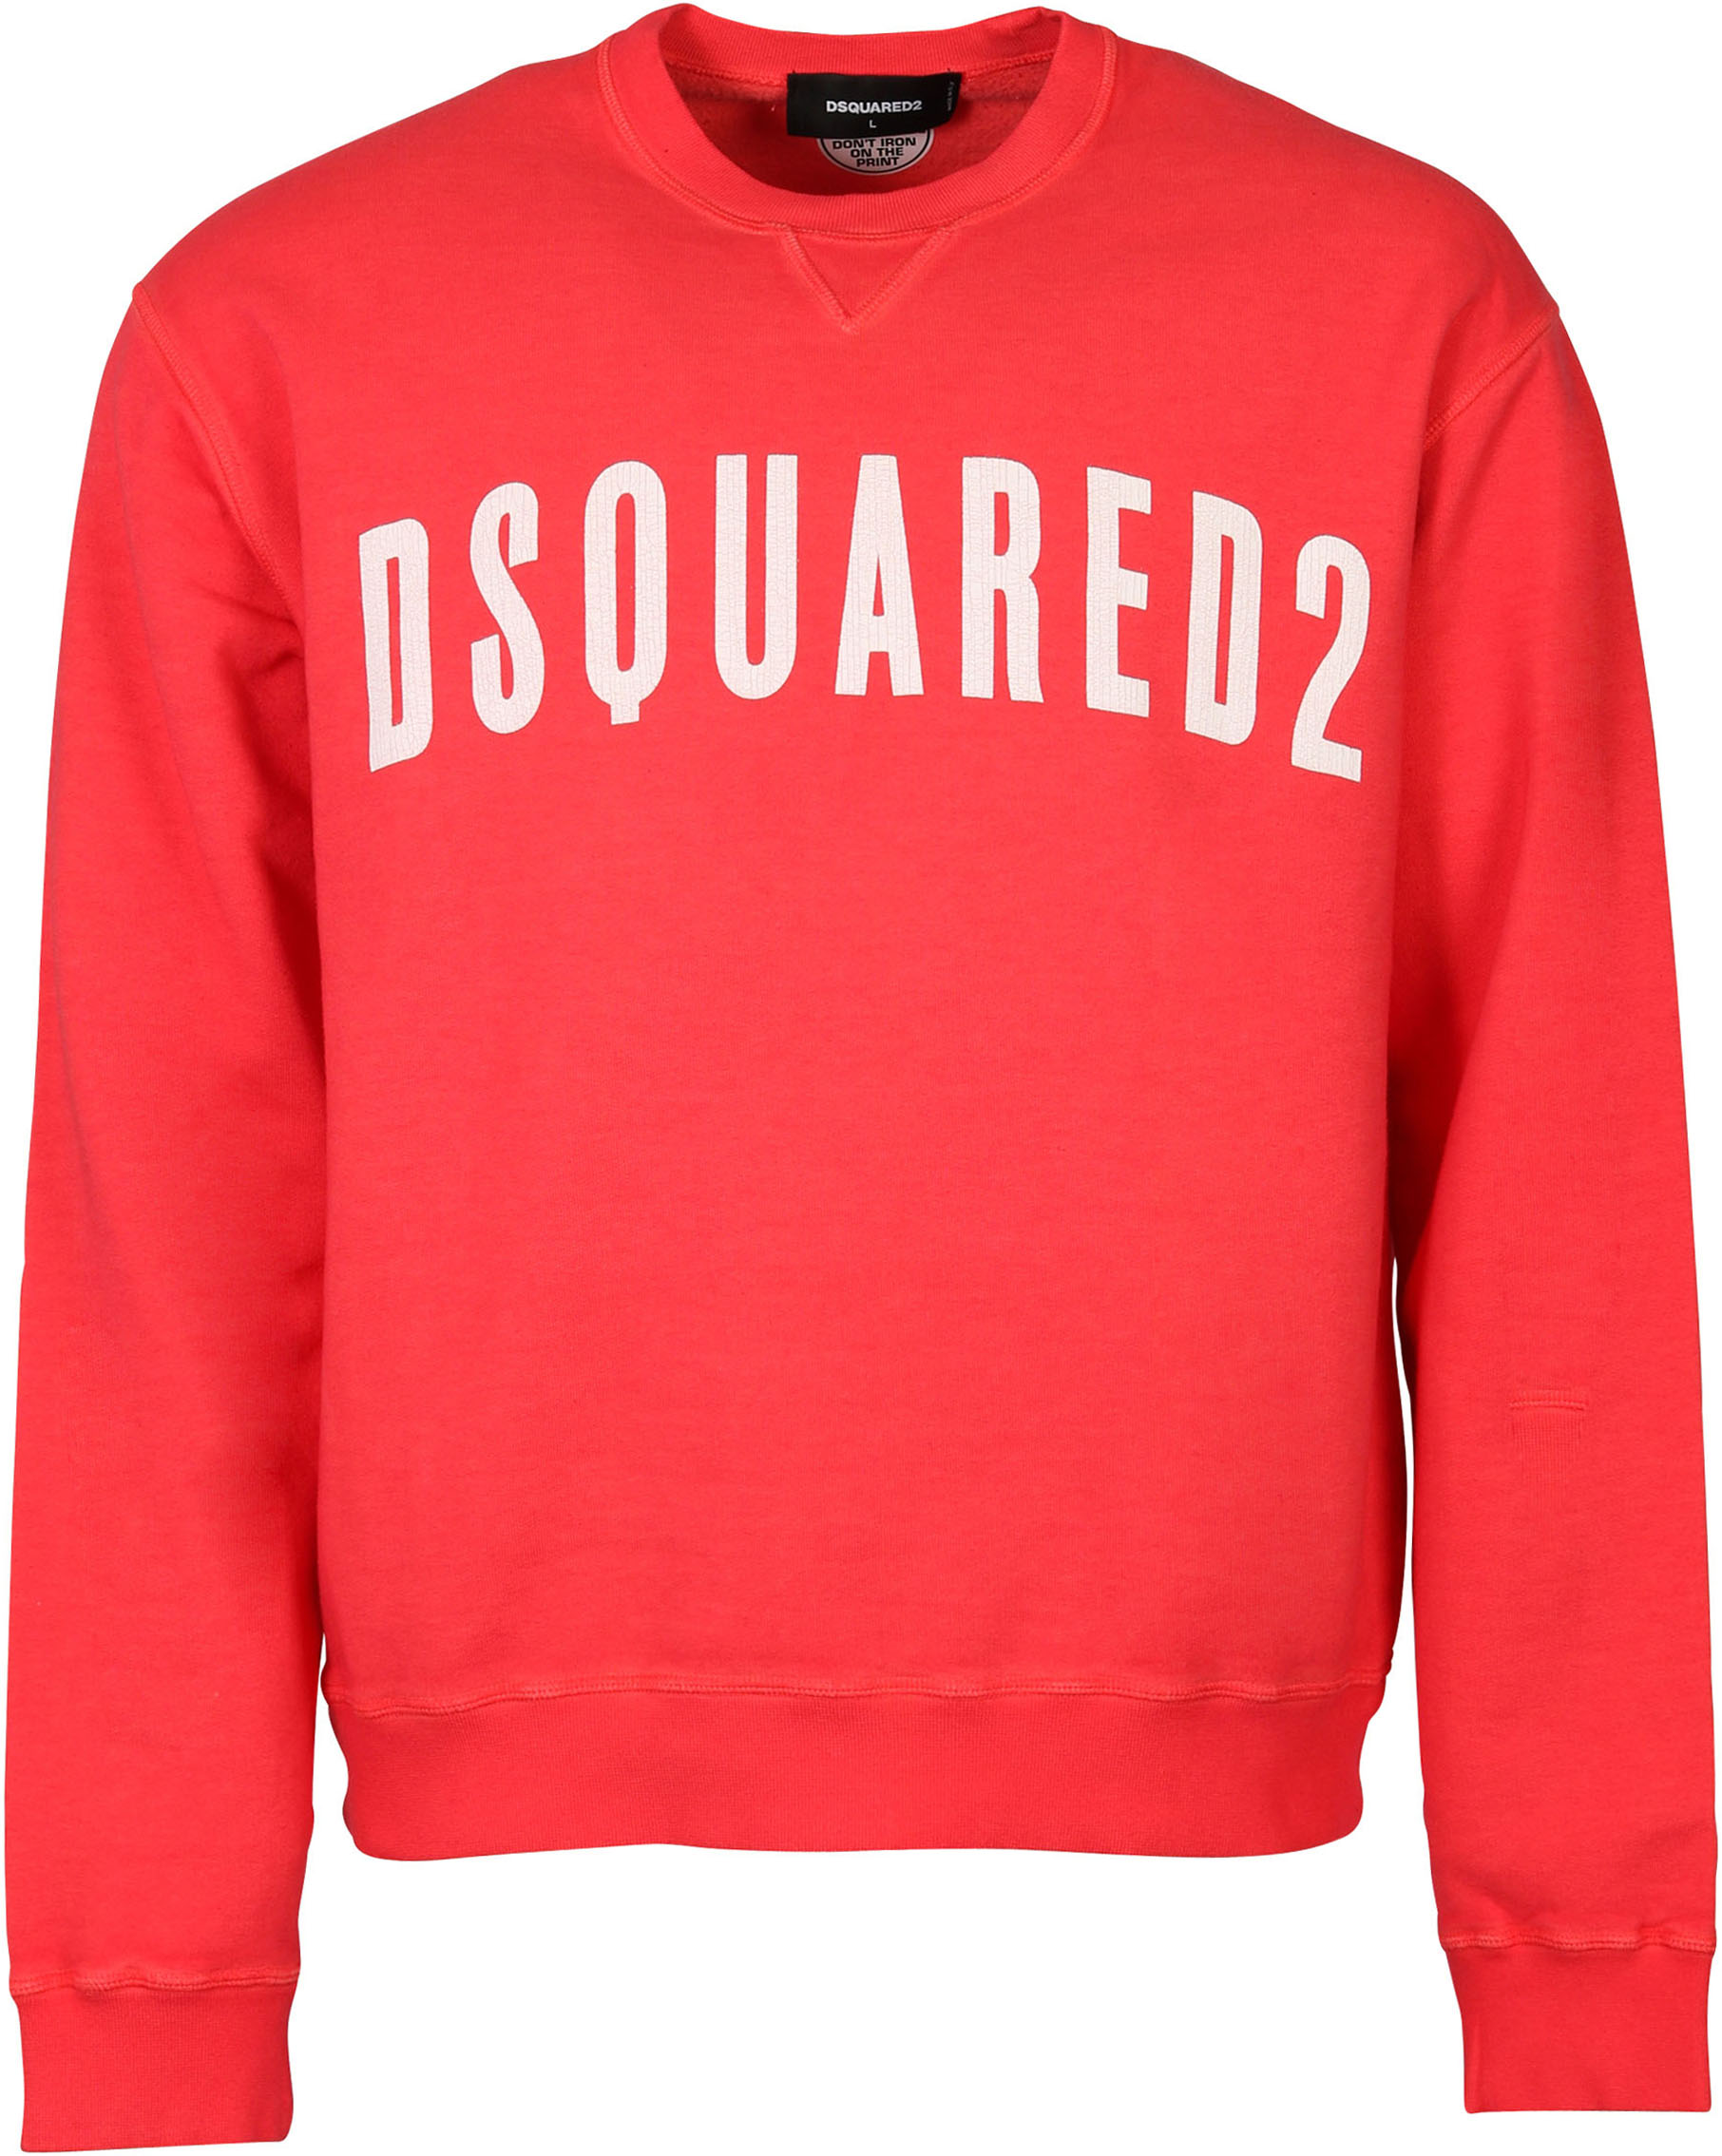 Dsquared Sweatshirt Coral Red Printed XXL